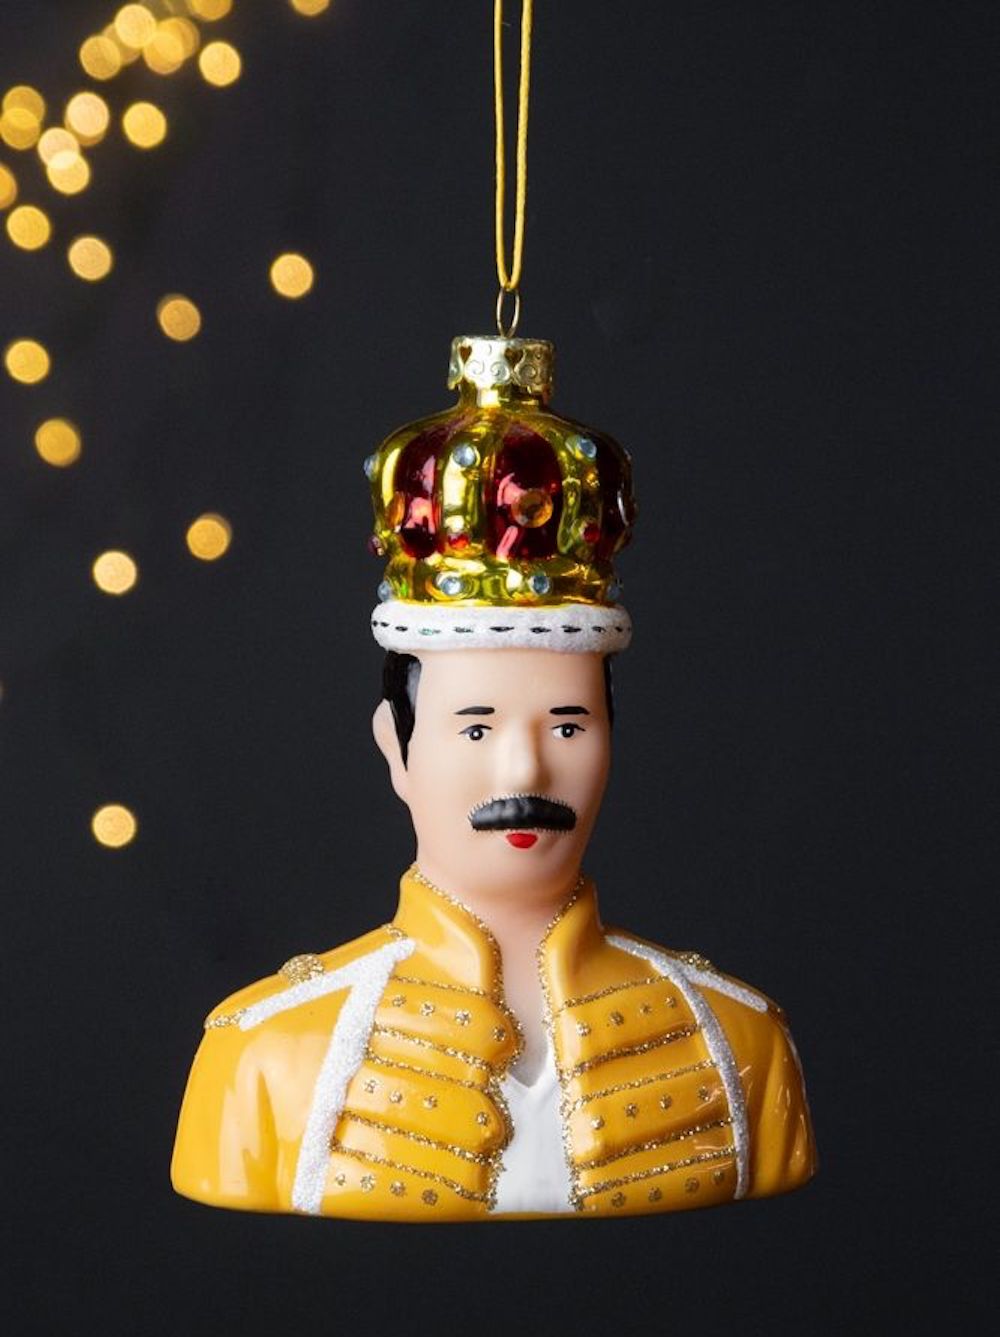 Bonkers baubles for your Christmas tree